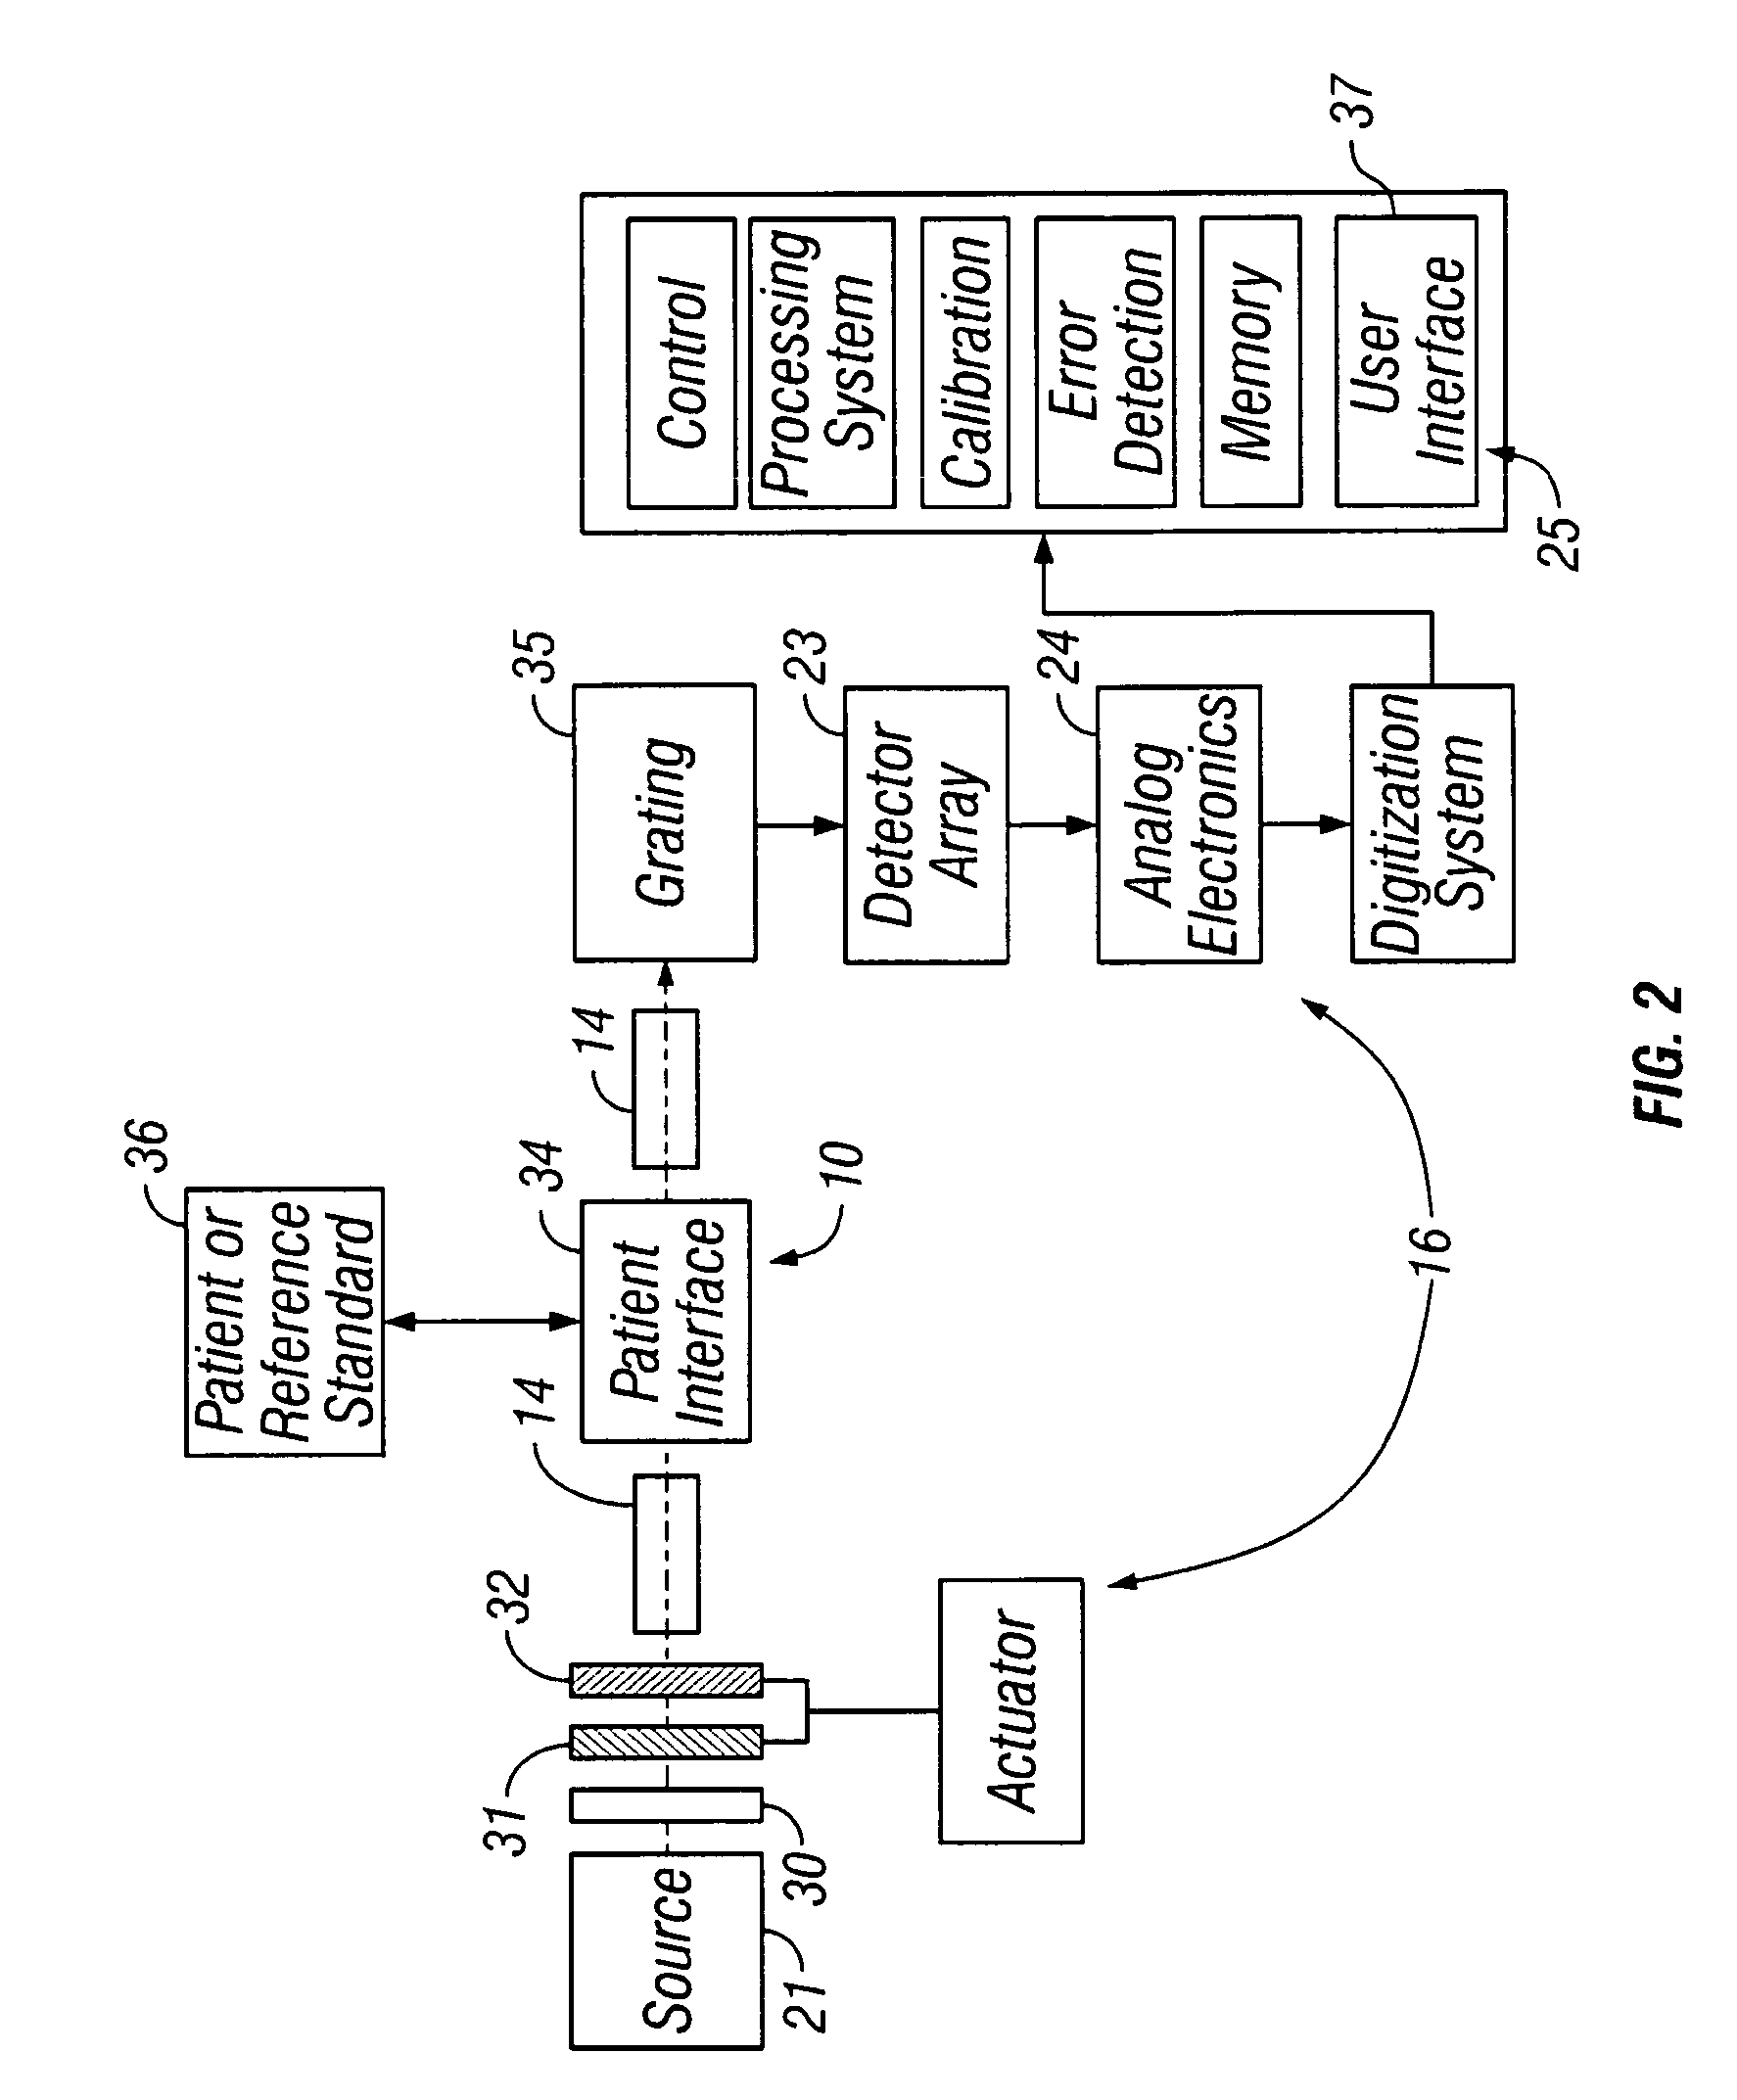 Compact apparatus for noninvasive measurement of glucose through near-infrared spectroscopy